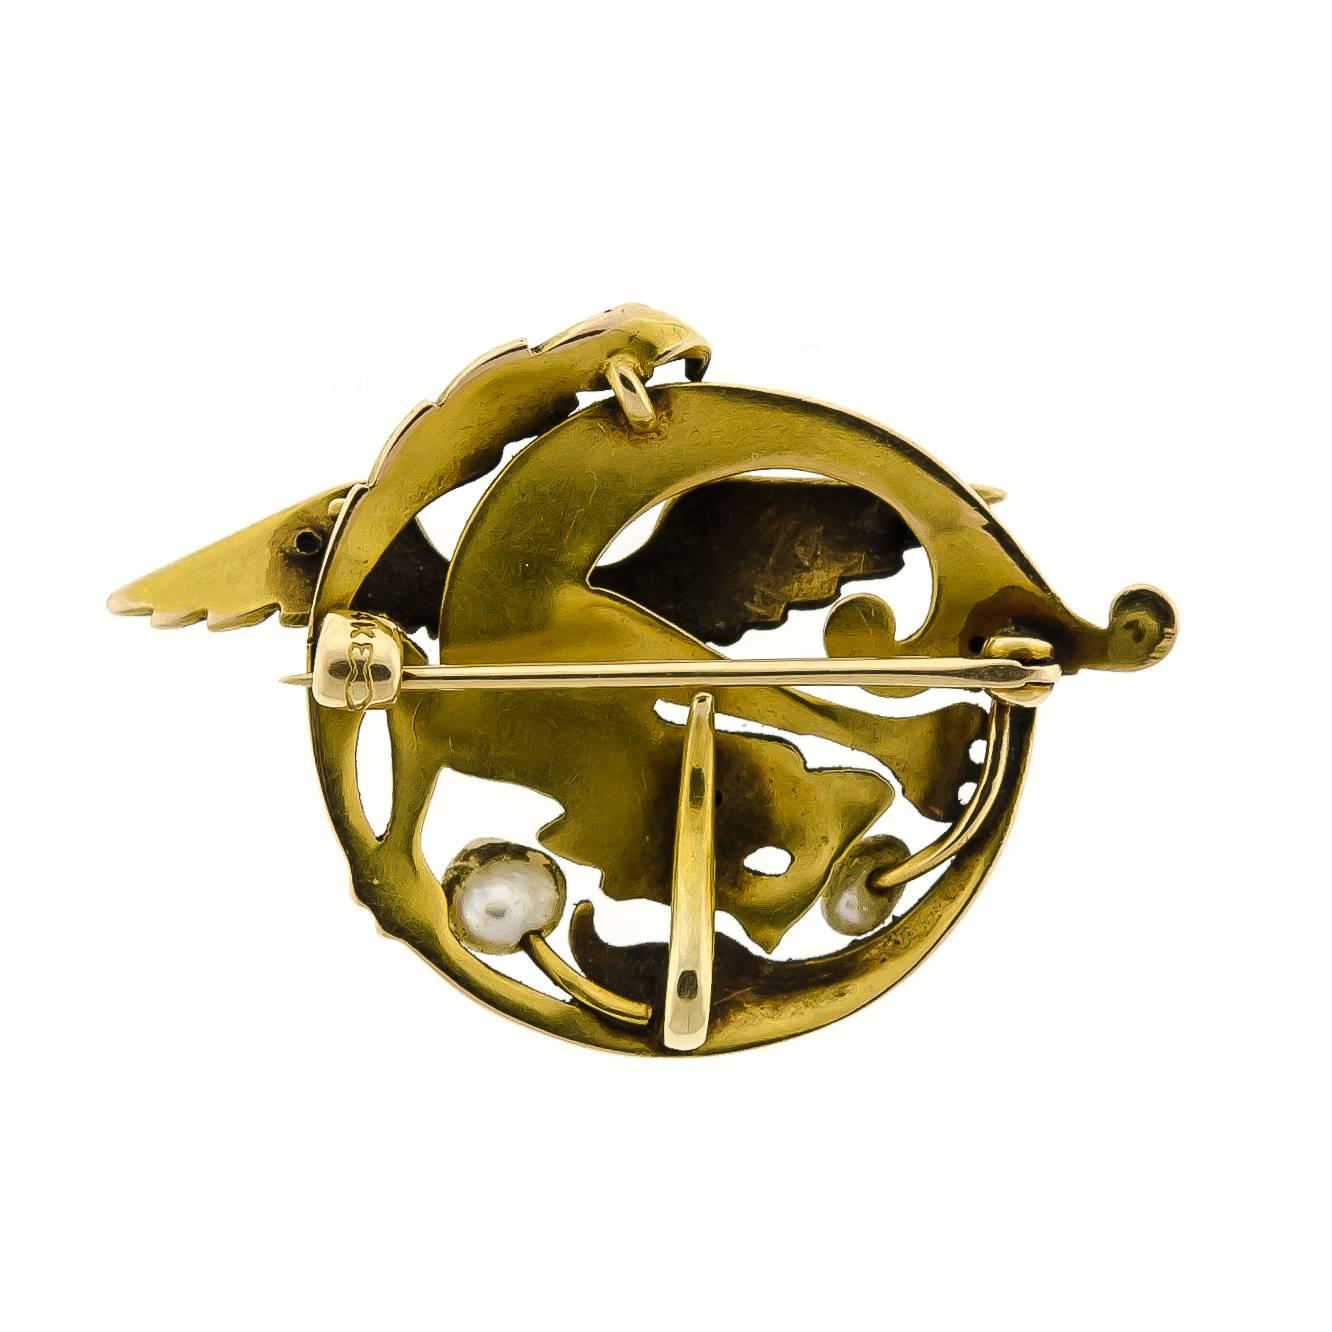 Art Nouveau circa 1900 brooch containing two (2) baroque pearls set into an elaborate 14kt yellow gold winged chimera  (dragon, griffin). Reverse: c-catch, ball hinge, pin stem, watch hook all original 